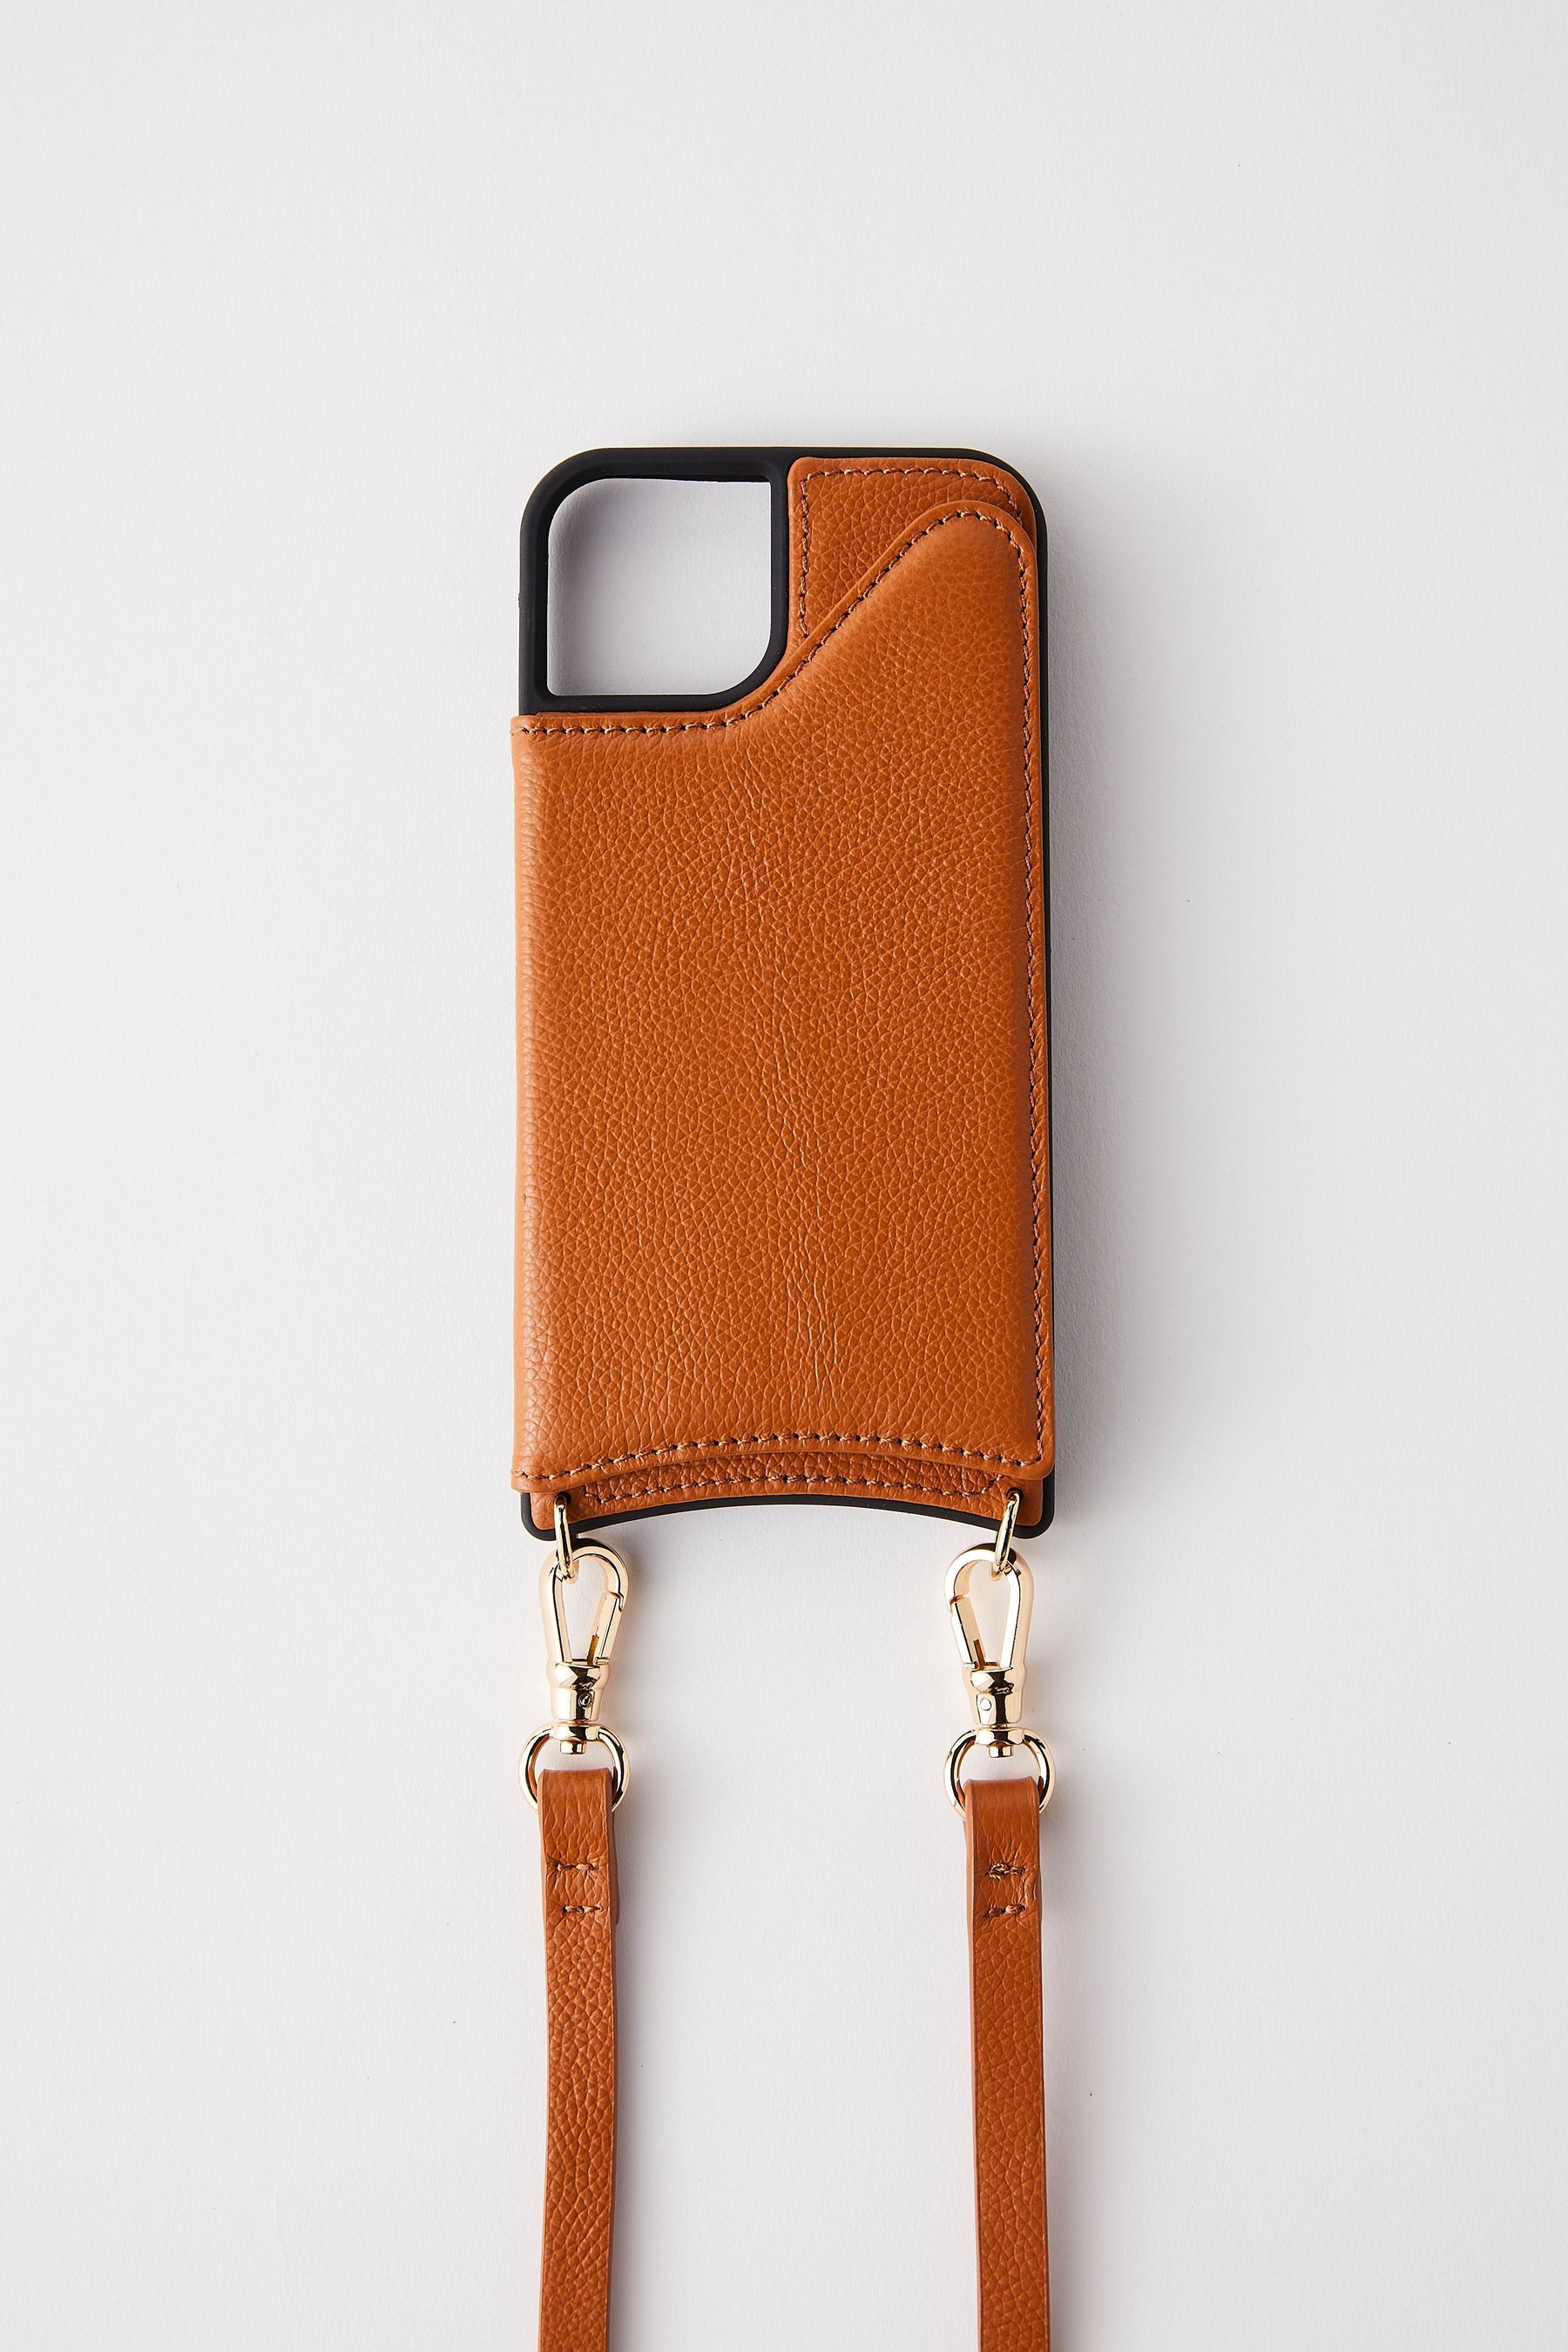 iPhone 11 Case - Crossbody Wallet Phone Case - Casebus Classic Fashion  Wallet Phone Case, with long strap, Credit Card Holder, Leather, Handbag  Purse Wrist Strap Protective Case - JULIAN CROS - Casebus